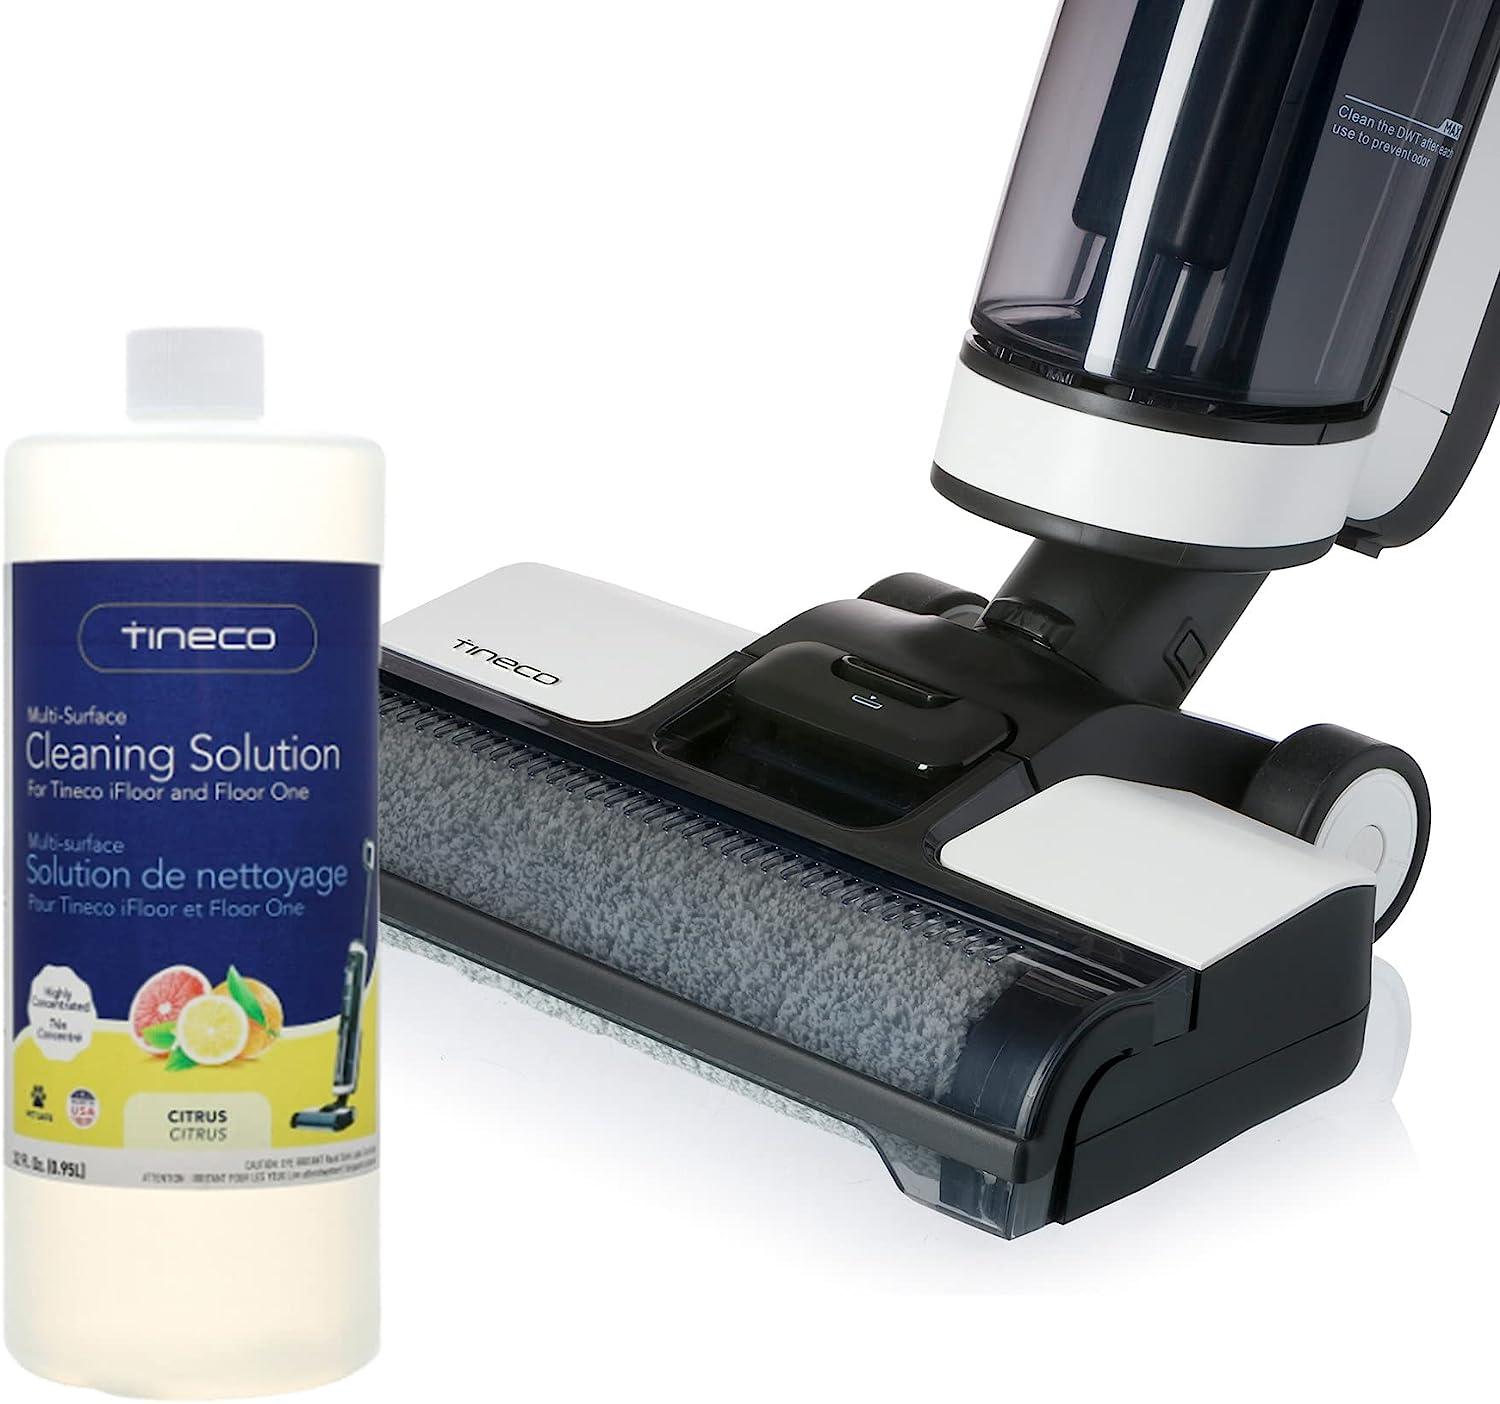 tinecoglobal Tineco Review #carpetcleaner #cleaning #BubblesAndBucket